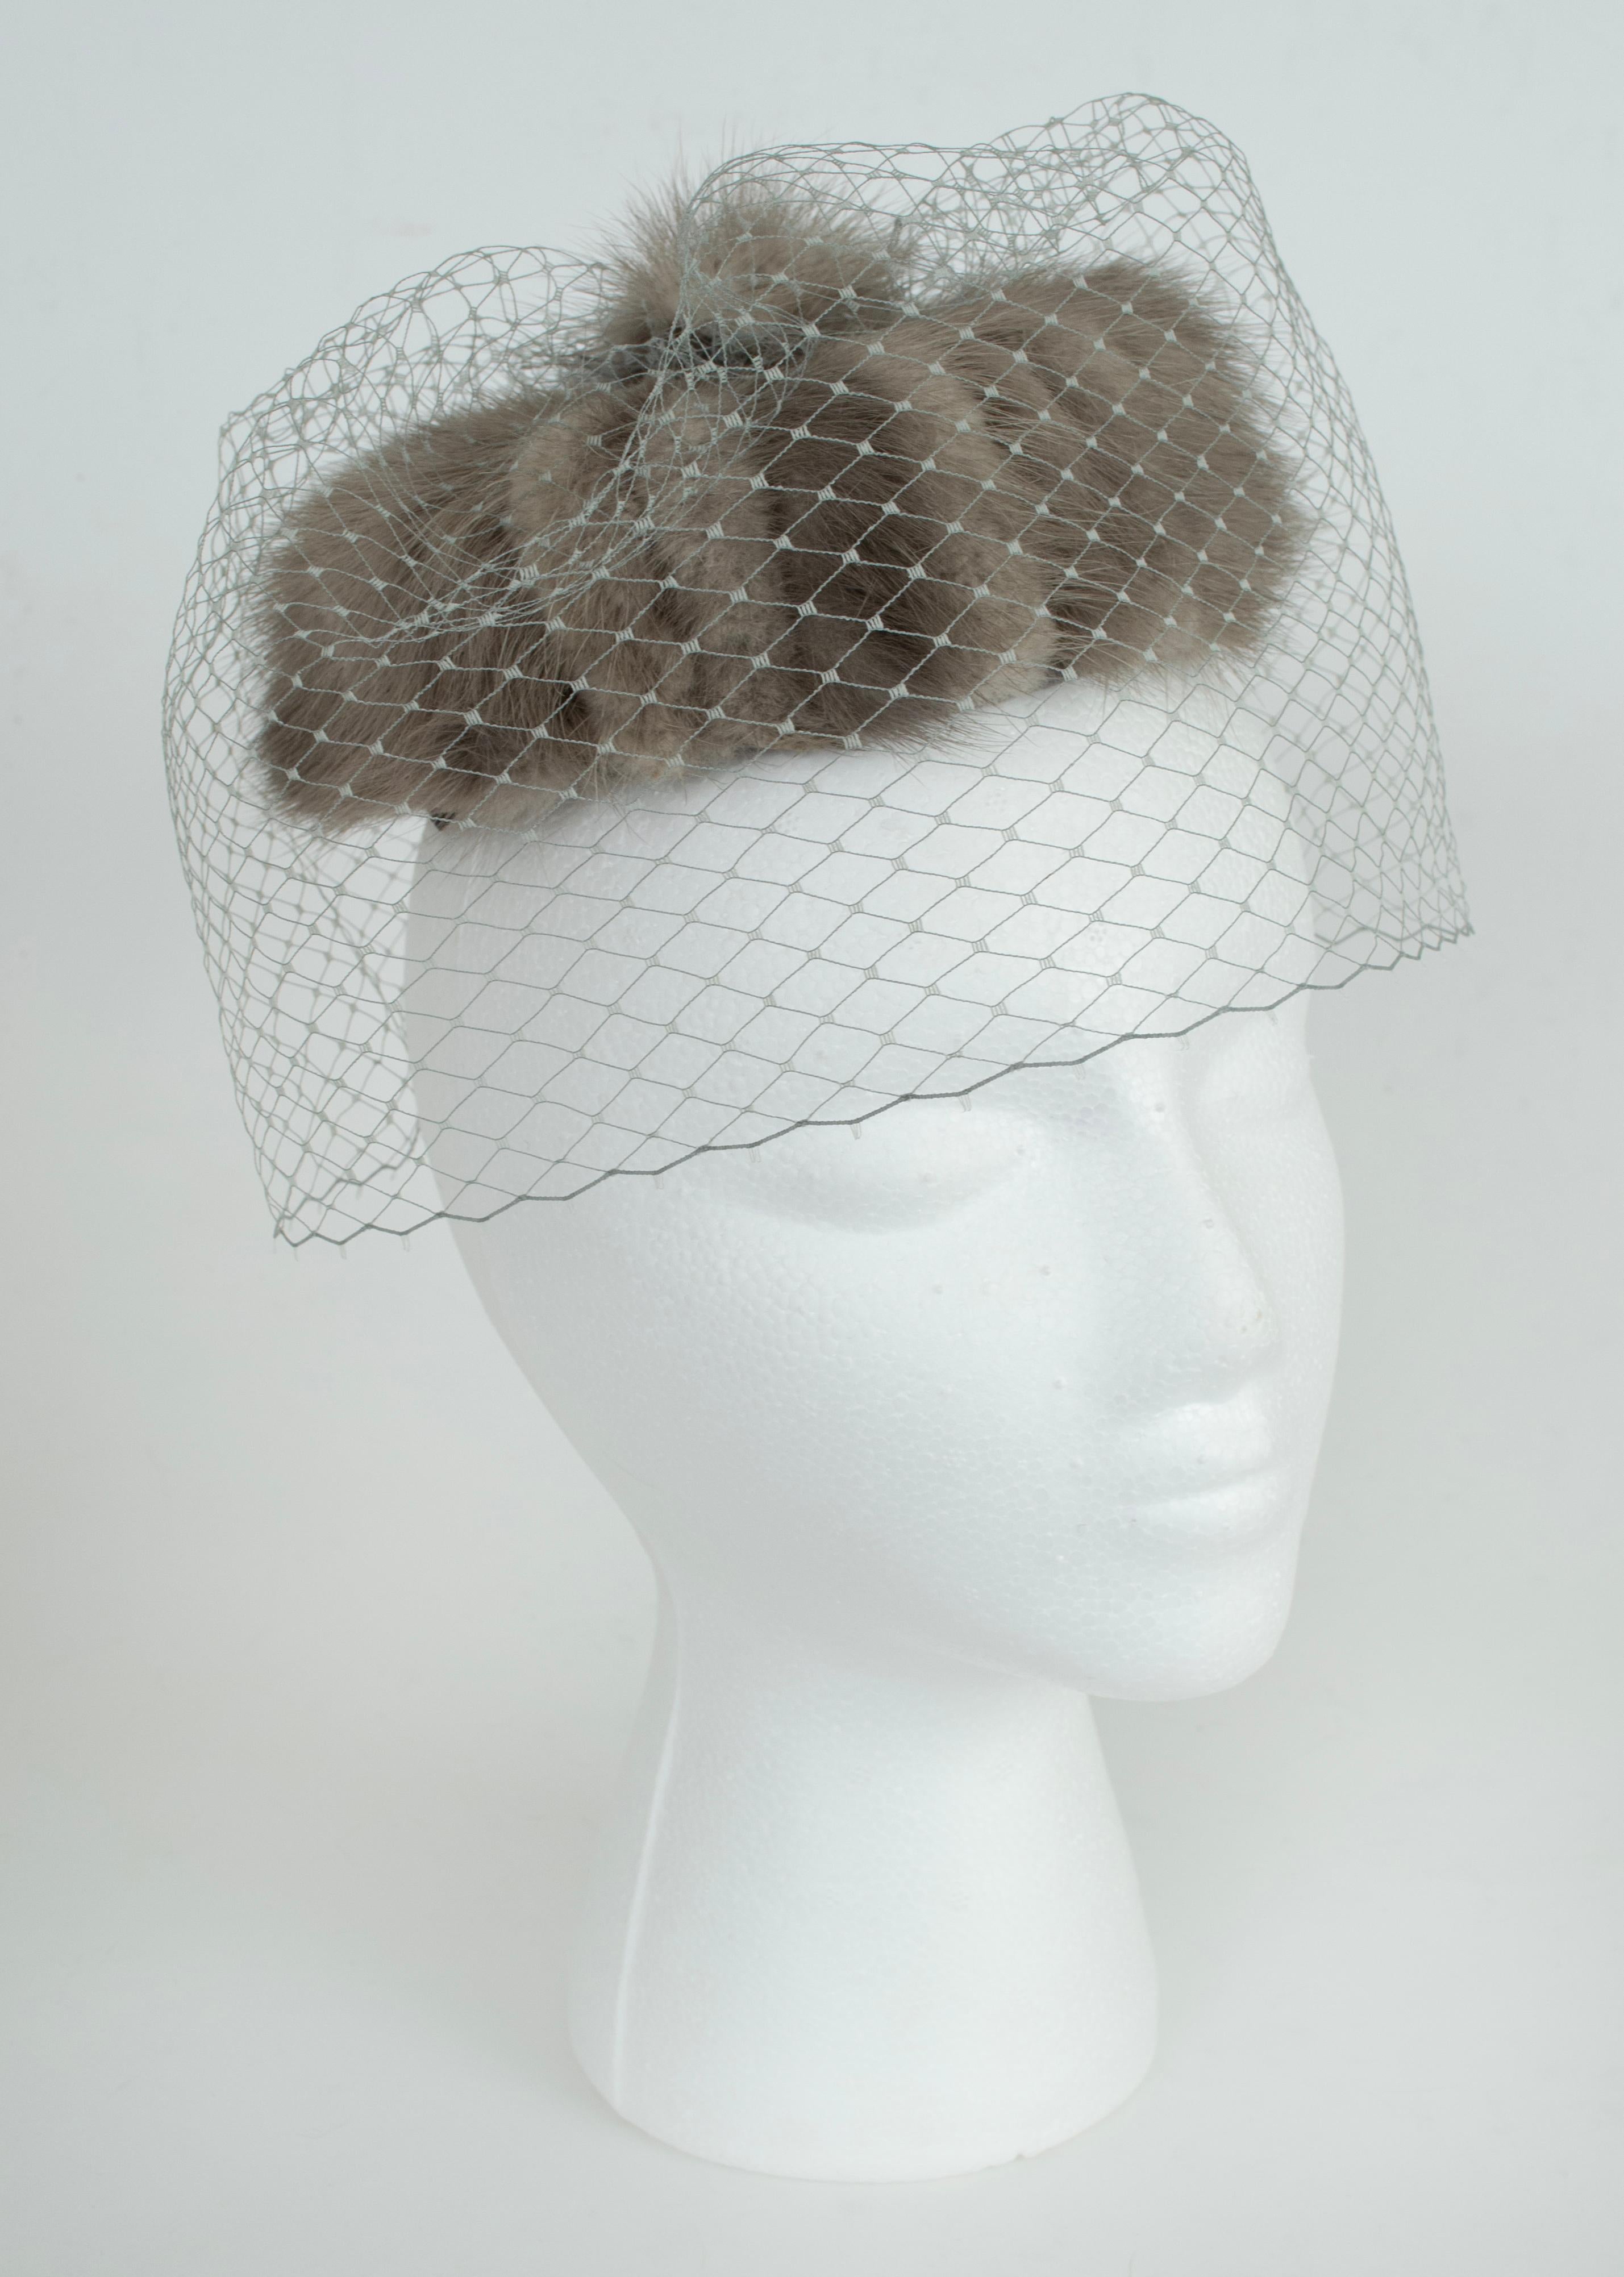 When you wish to shut the world out politely and elegantly, consider a 360-degree birdcage veil: not only does it scream “hauteur,” it acts as a transparent fence around the entire head. Traditionally reserved for funerals, this unusual model in